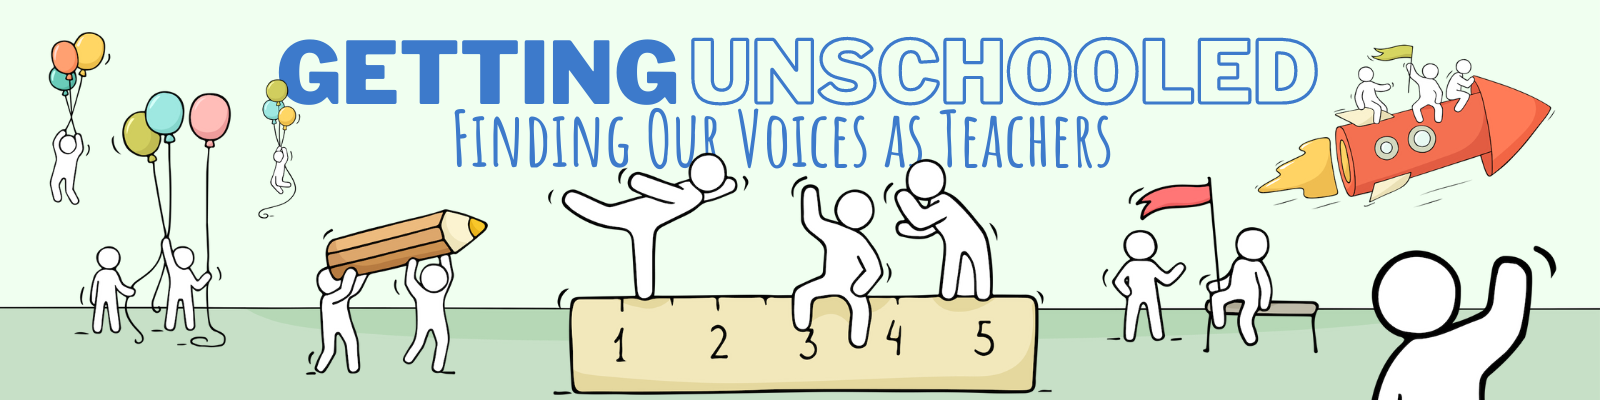 Getting Unschooled: Finding Our Voices as Teachers